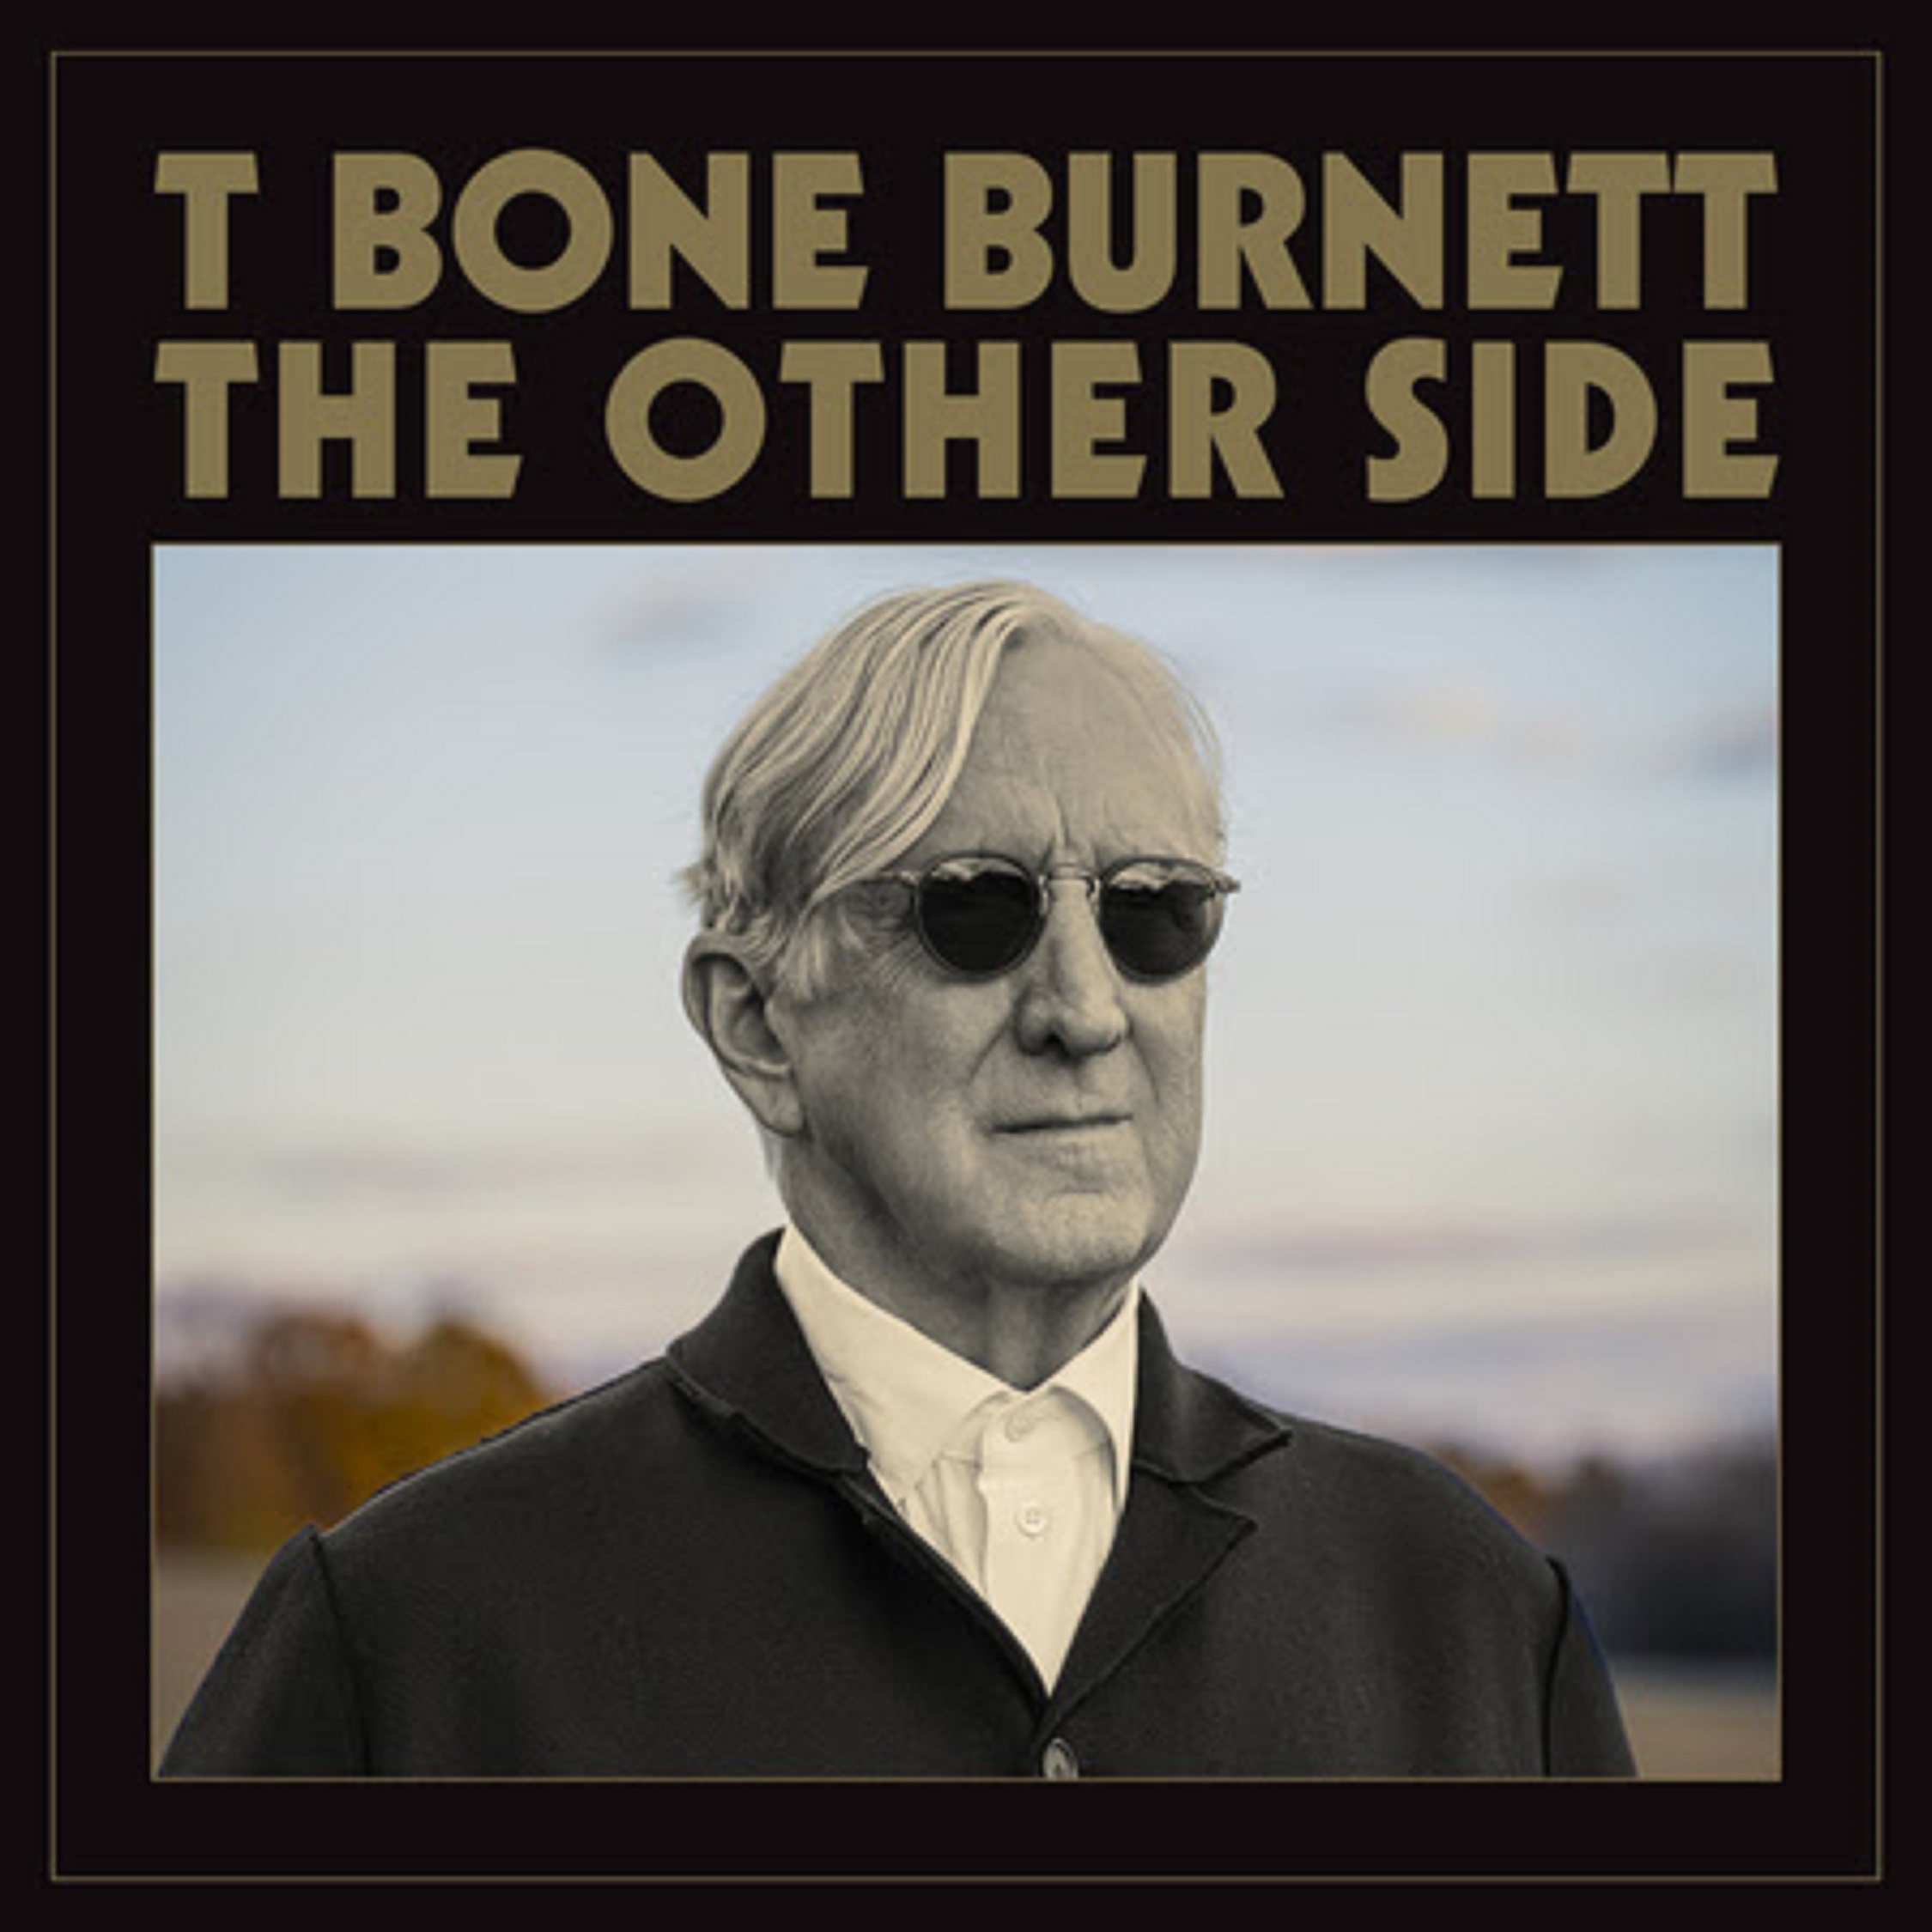 T Bone Burnett’s first solo album in nearly 20 years, The Other Side, out now on Verve Forecast